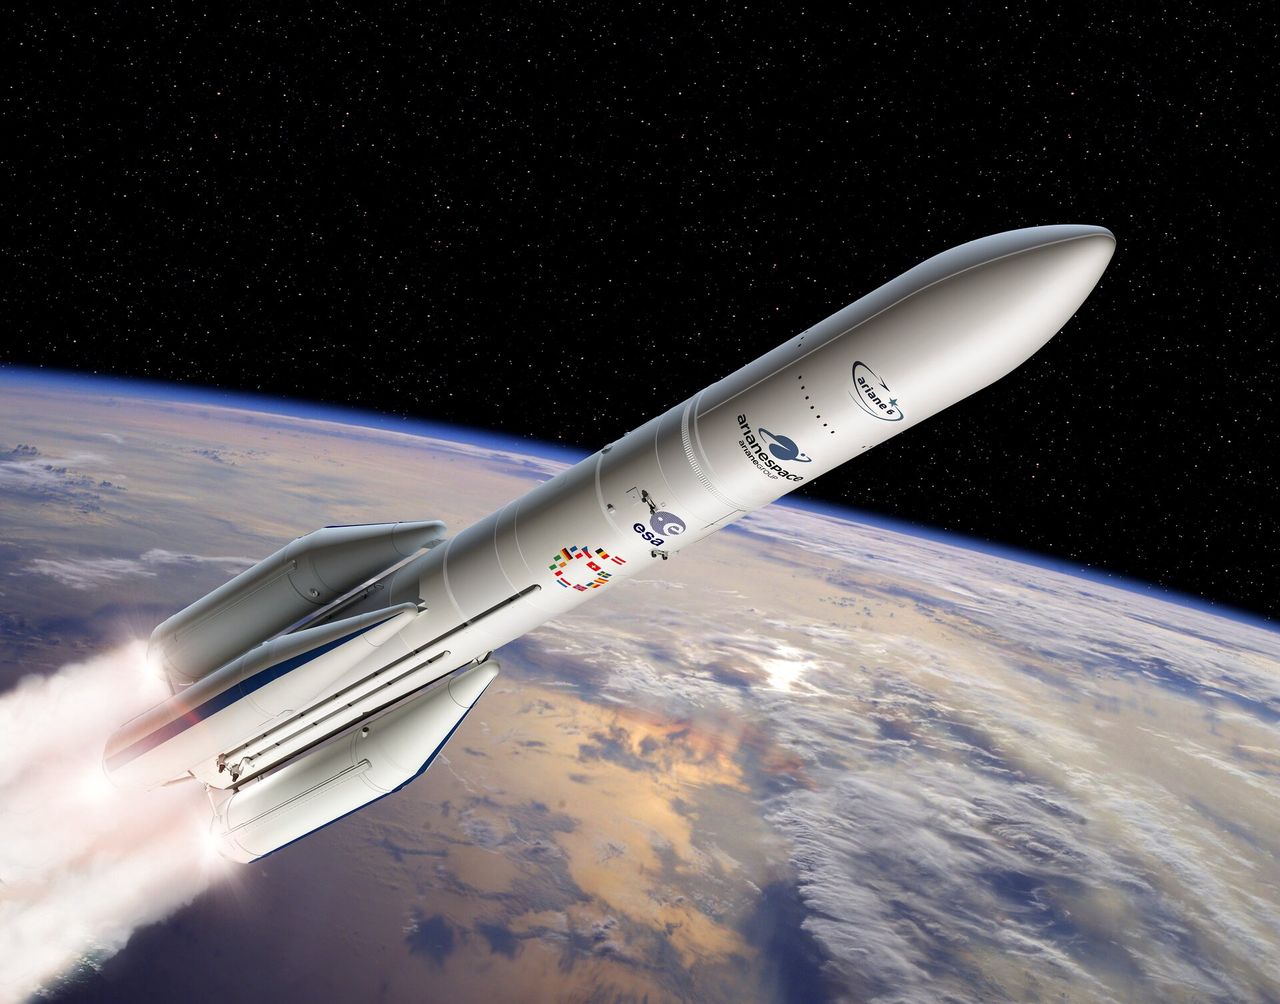 First flight of Ariane 6. The rocket set to give Europe independence